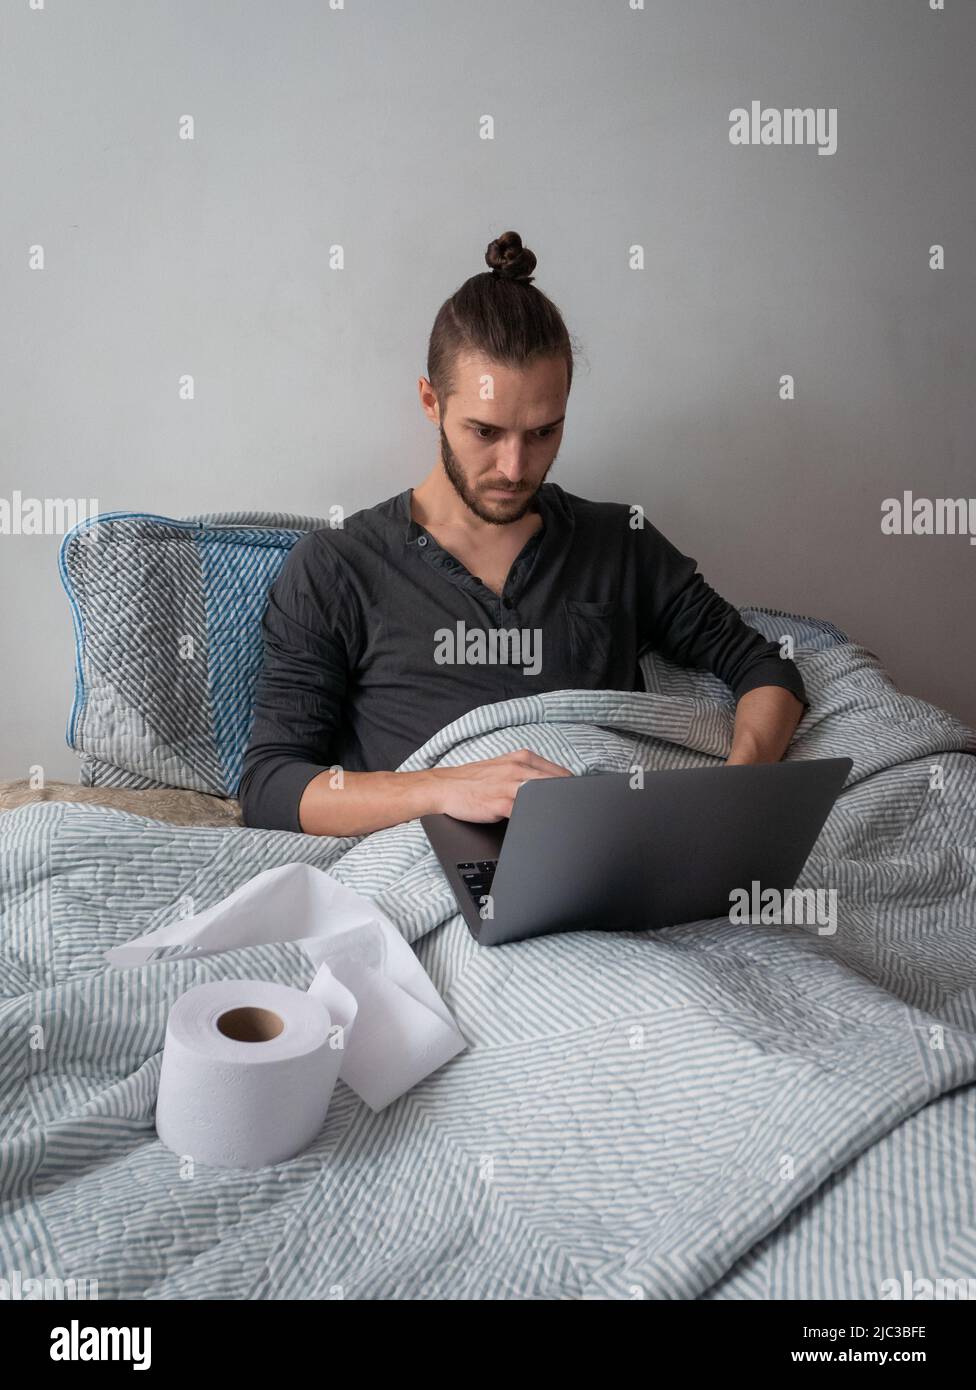 https://c8.alamy.com/comp/2JC3BFE/white-man-in-bed-with-a-cold-is-working-on-his-laptop-computer-next-to-a-toilet-paper-for-his-nose-2JC3BFE.jpg